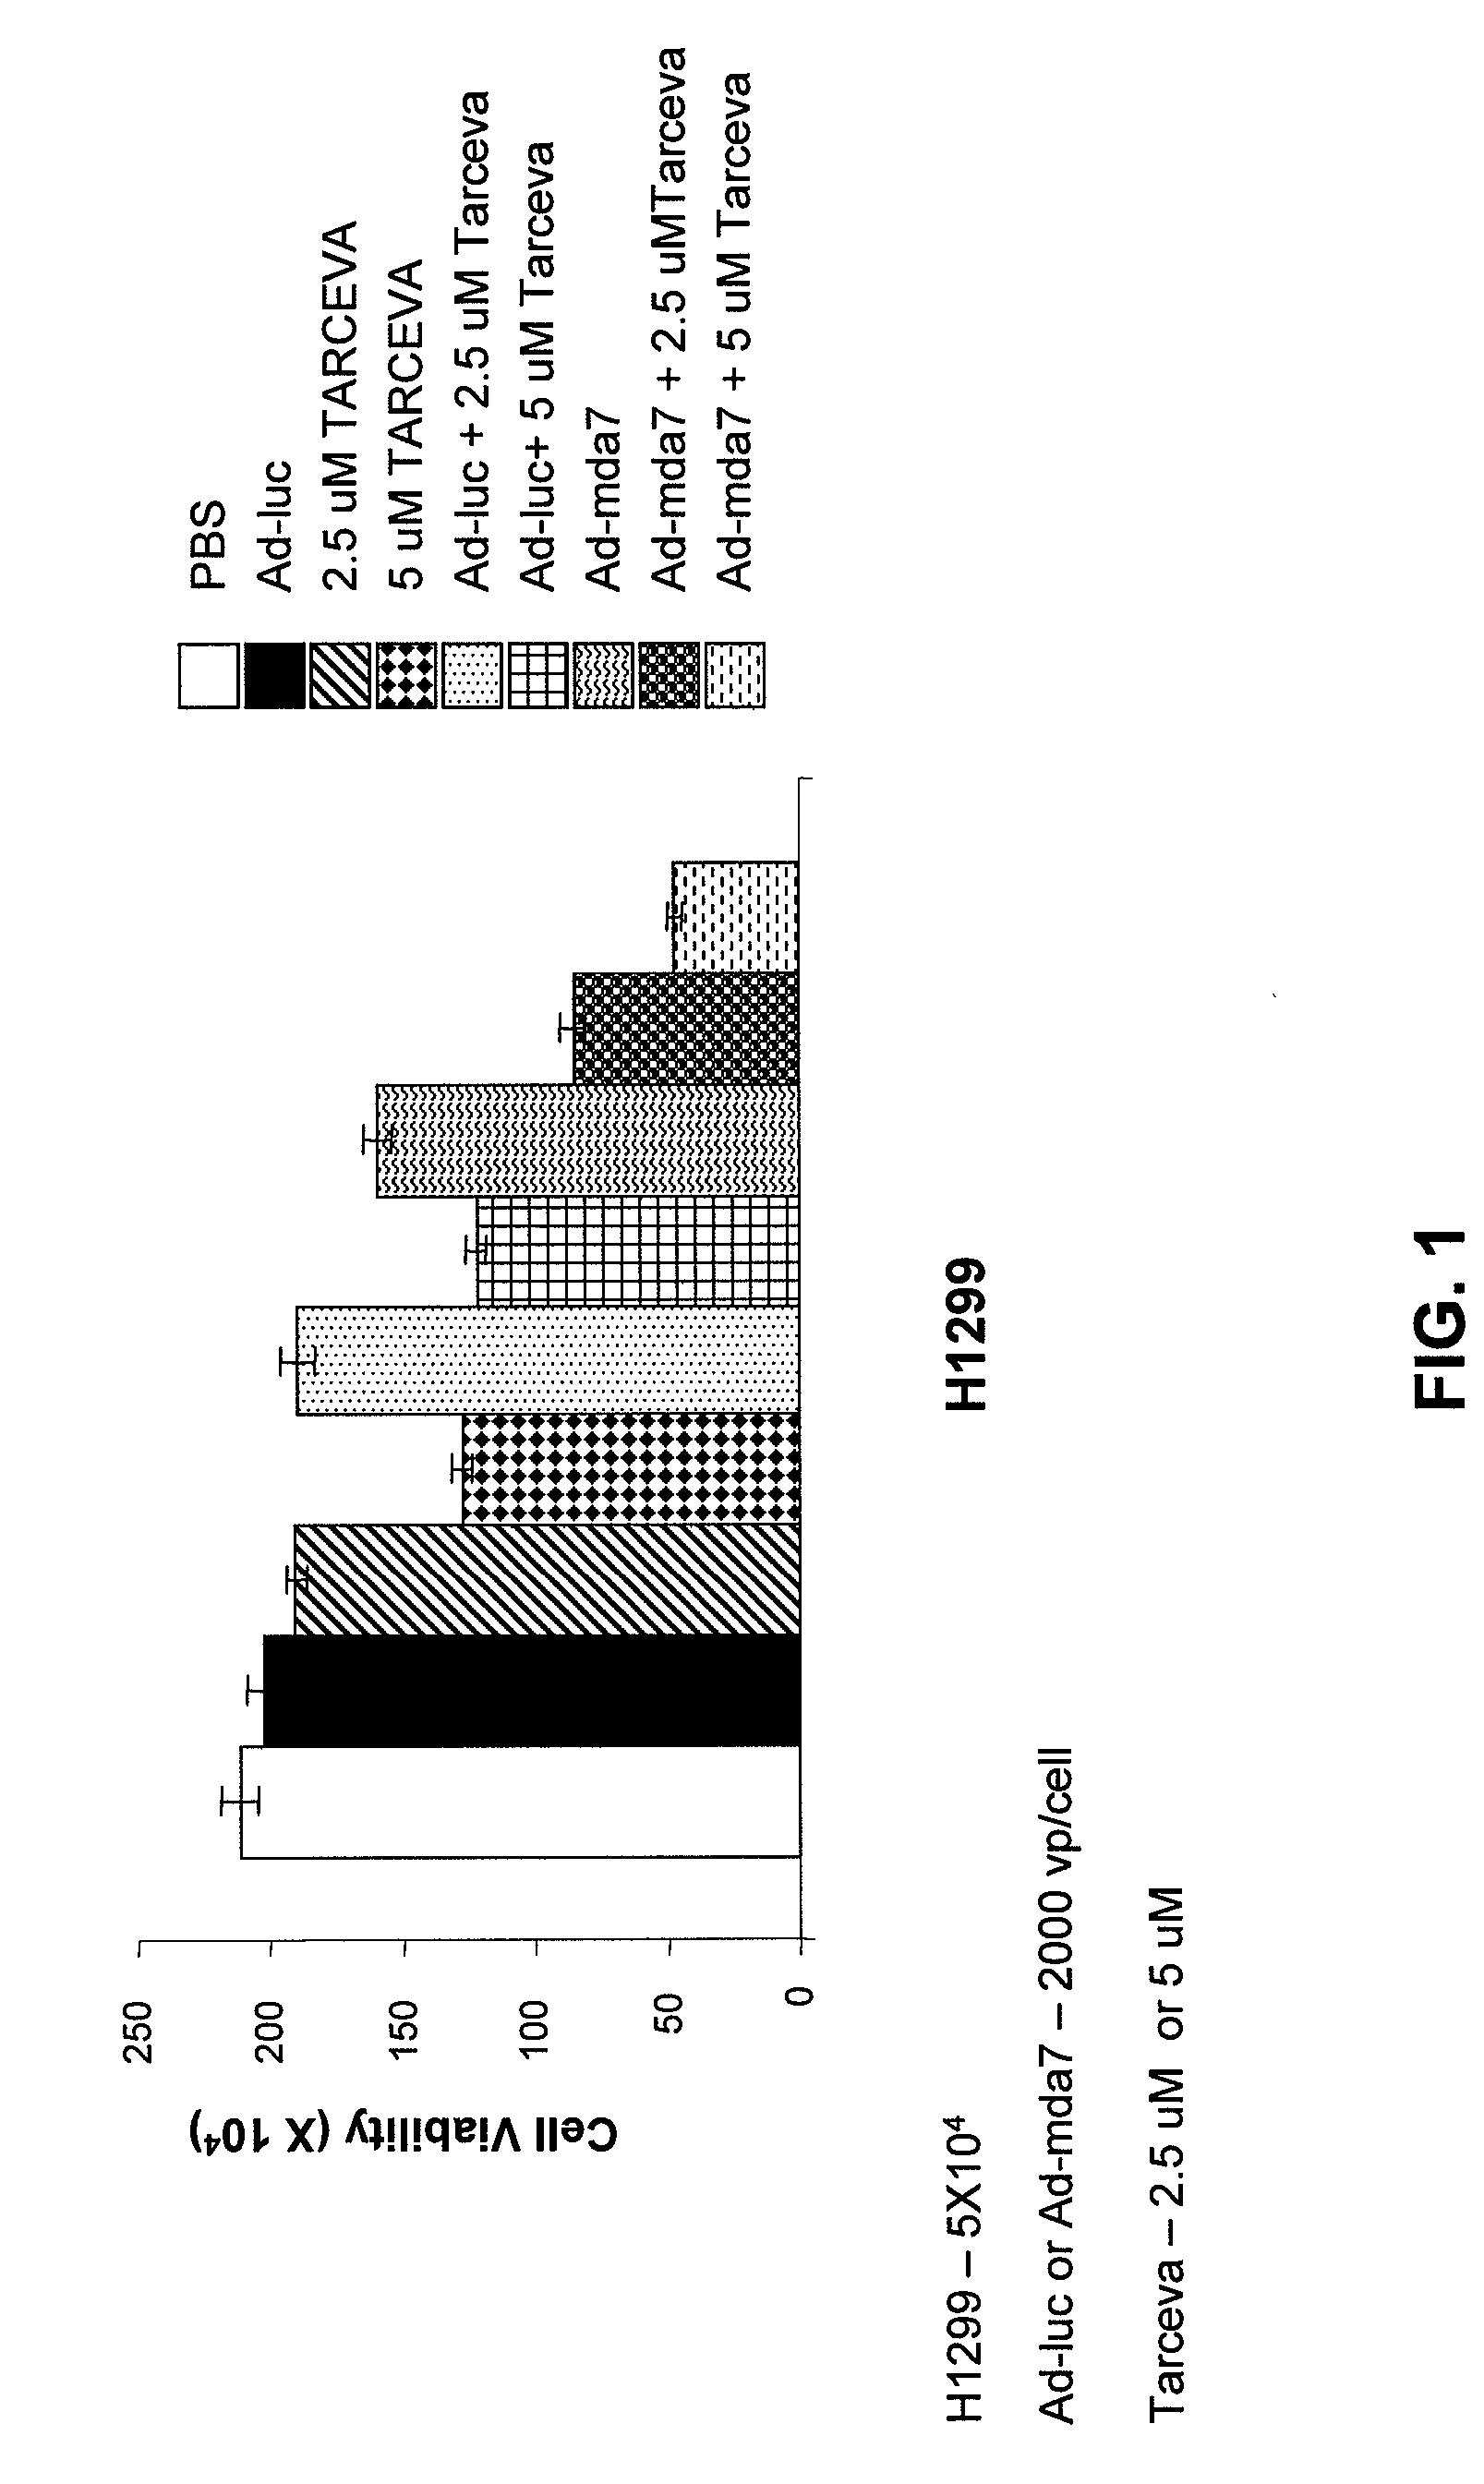 Compositions and Methods Involving MDA-7 for the Treatment of Cancer